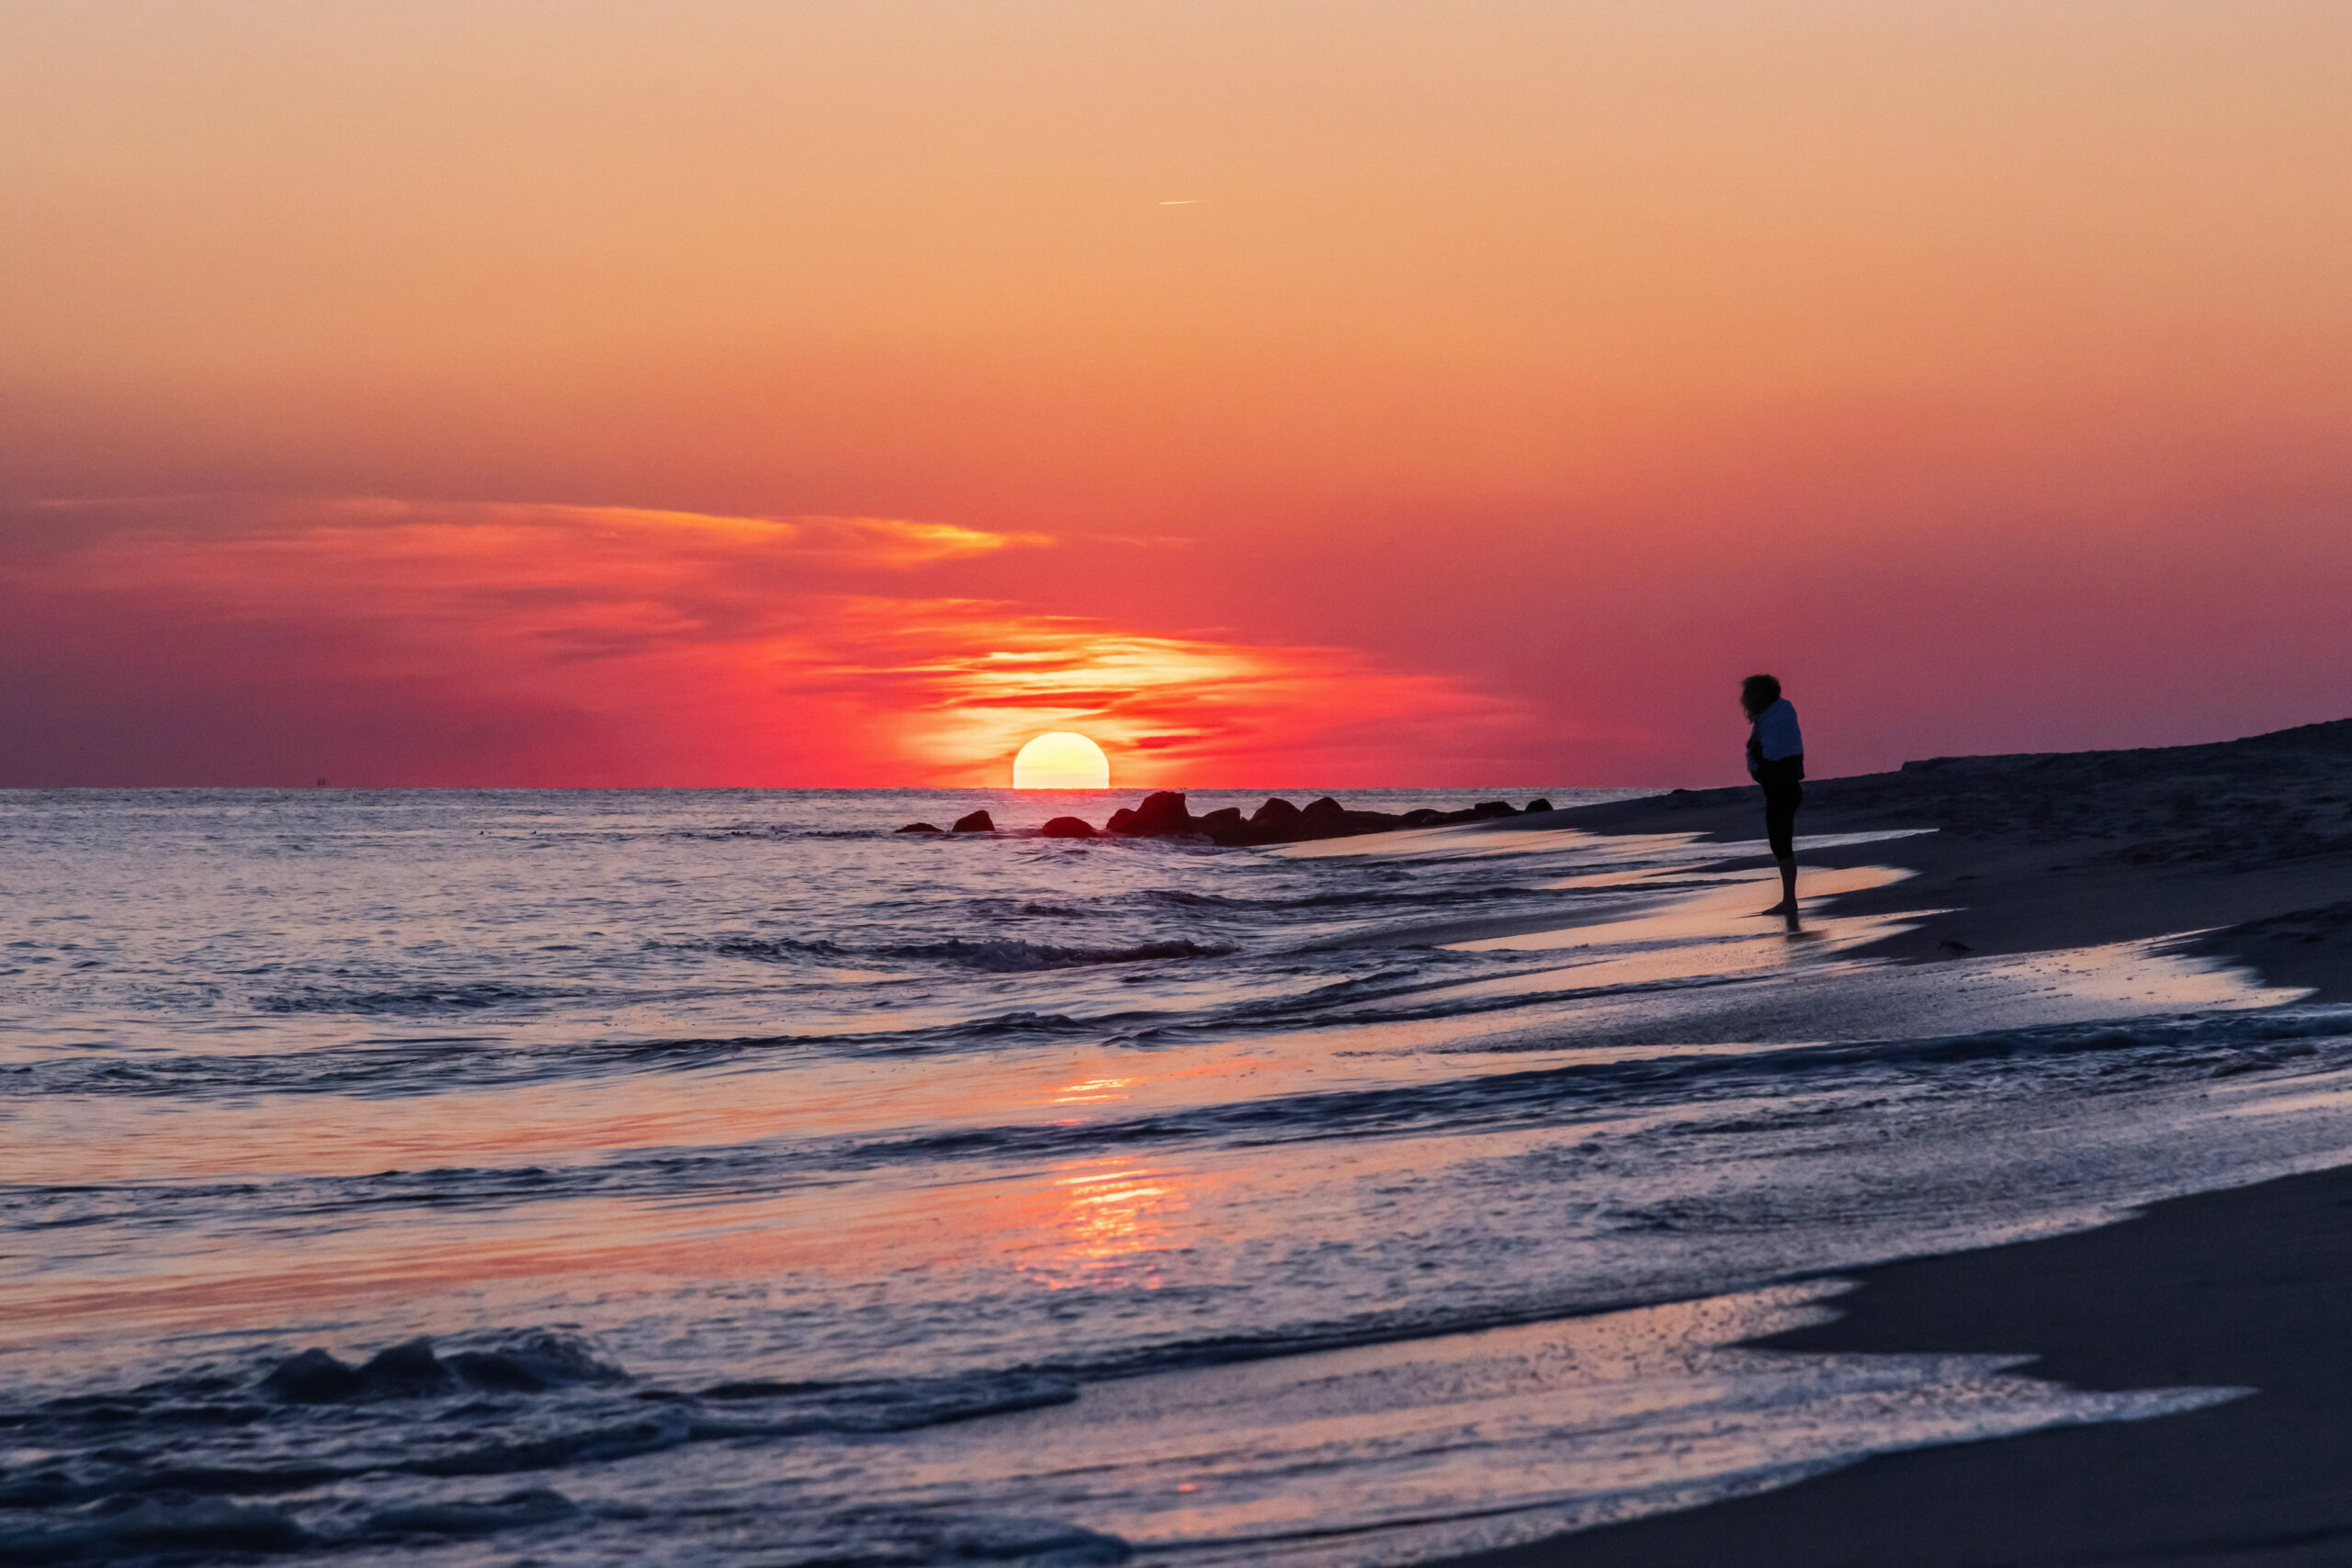 A person standing at the ocean at sunset. The sun and sky look pink and orange, and the tide is rushing in.